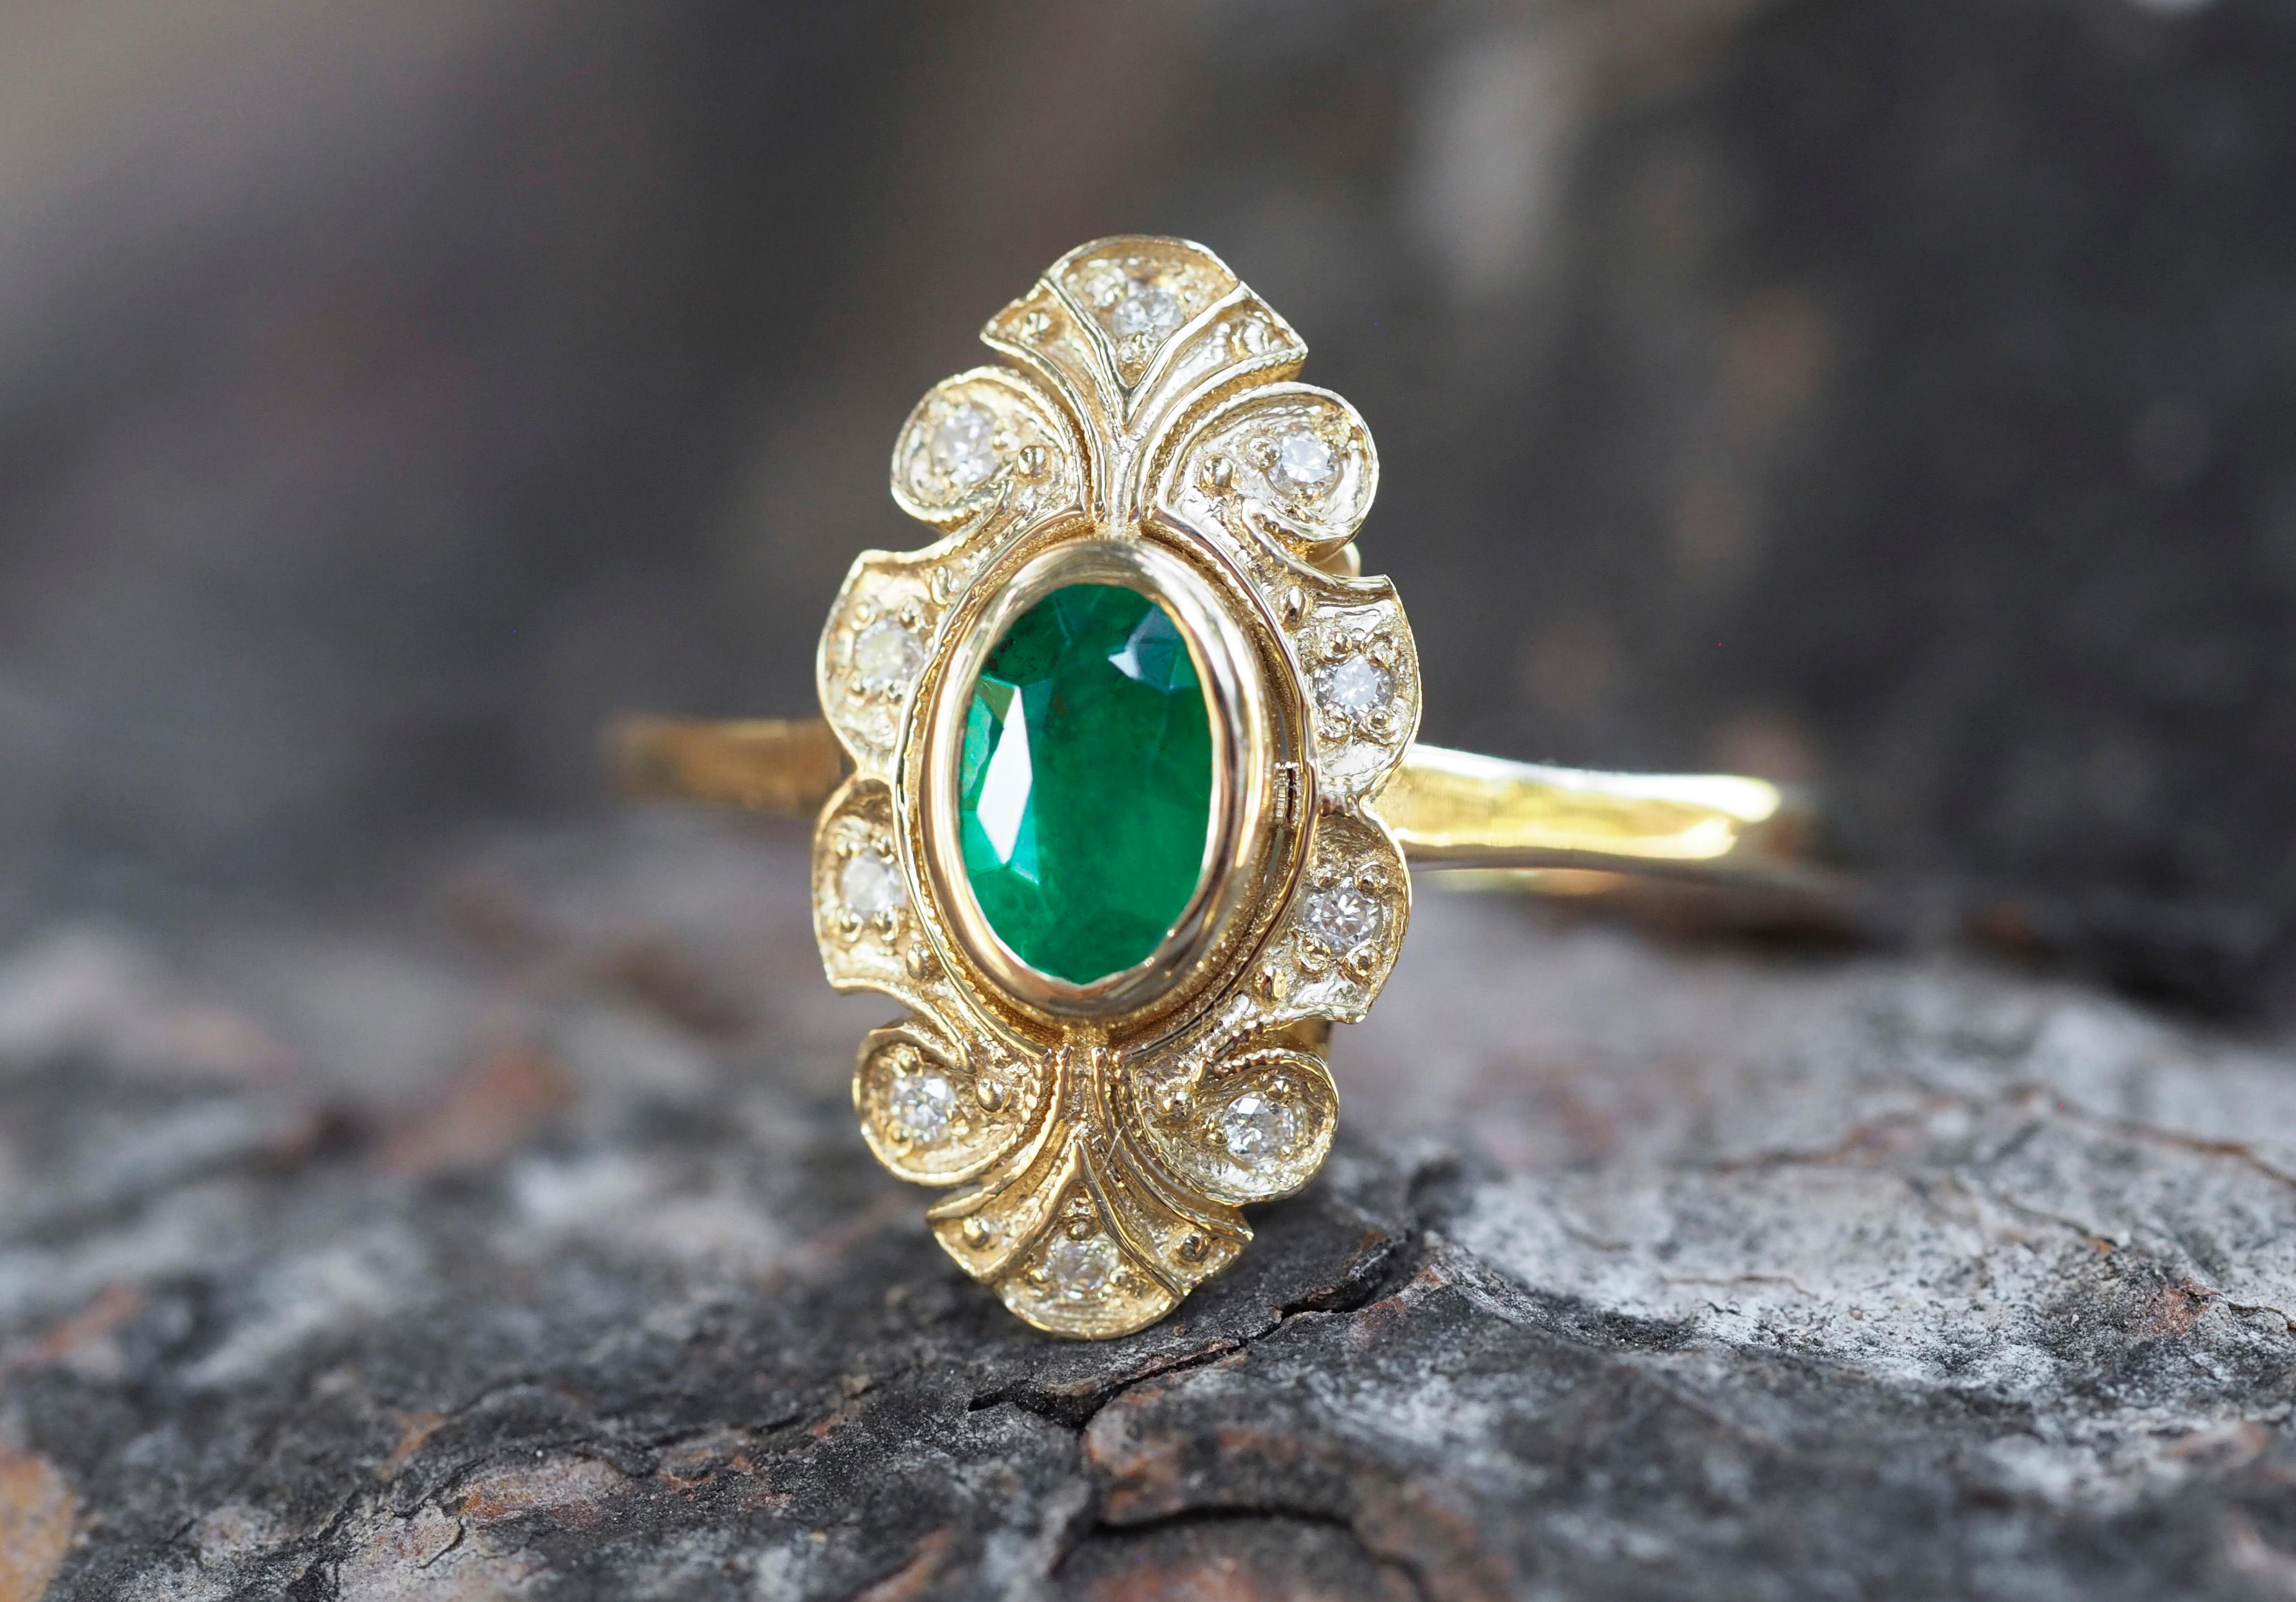 Emerald Vintage gold ring. 
Emerald gold ring. Oval emerald 14k gold ring. Emerald Dainty ring. Art Deco emerald ring. Genuine emerald ring.

Metal: 14k gold
Weight: 3.40 g. depends from size.

Gemstones (all are tested by proffesional